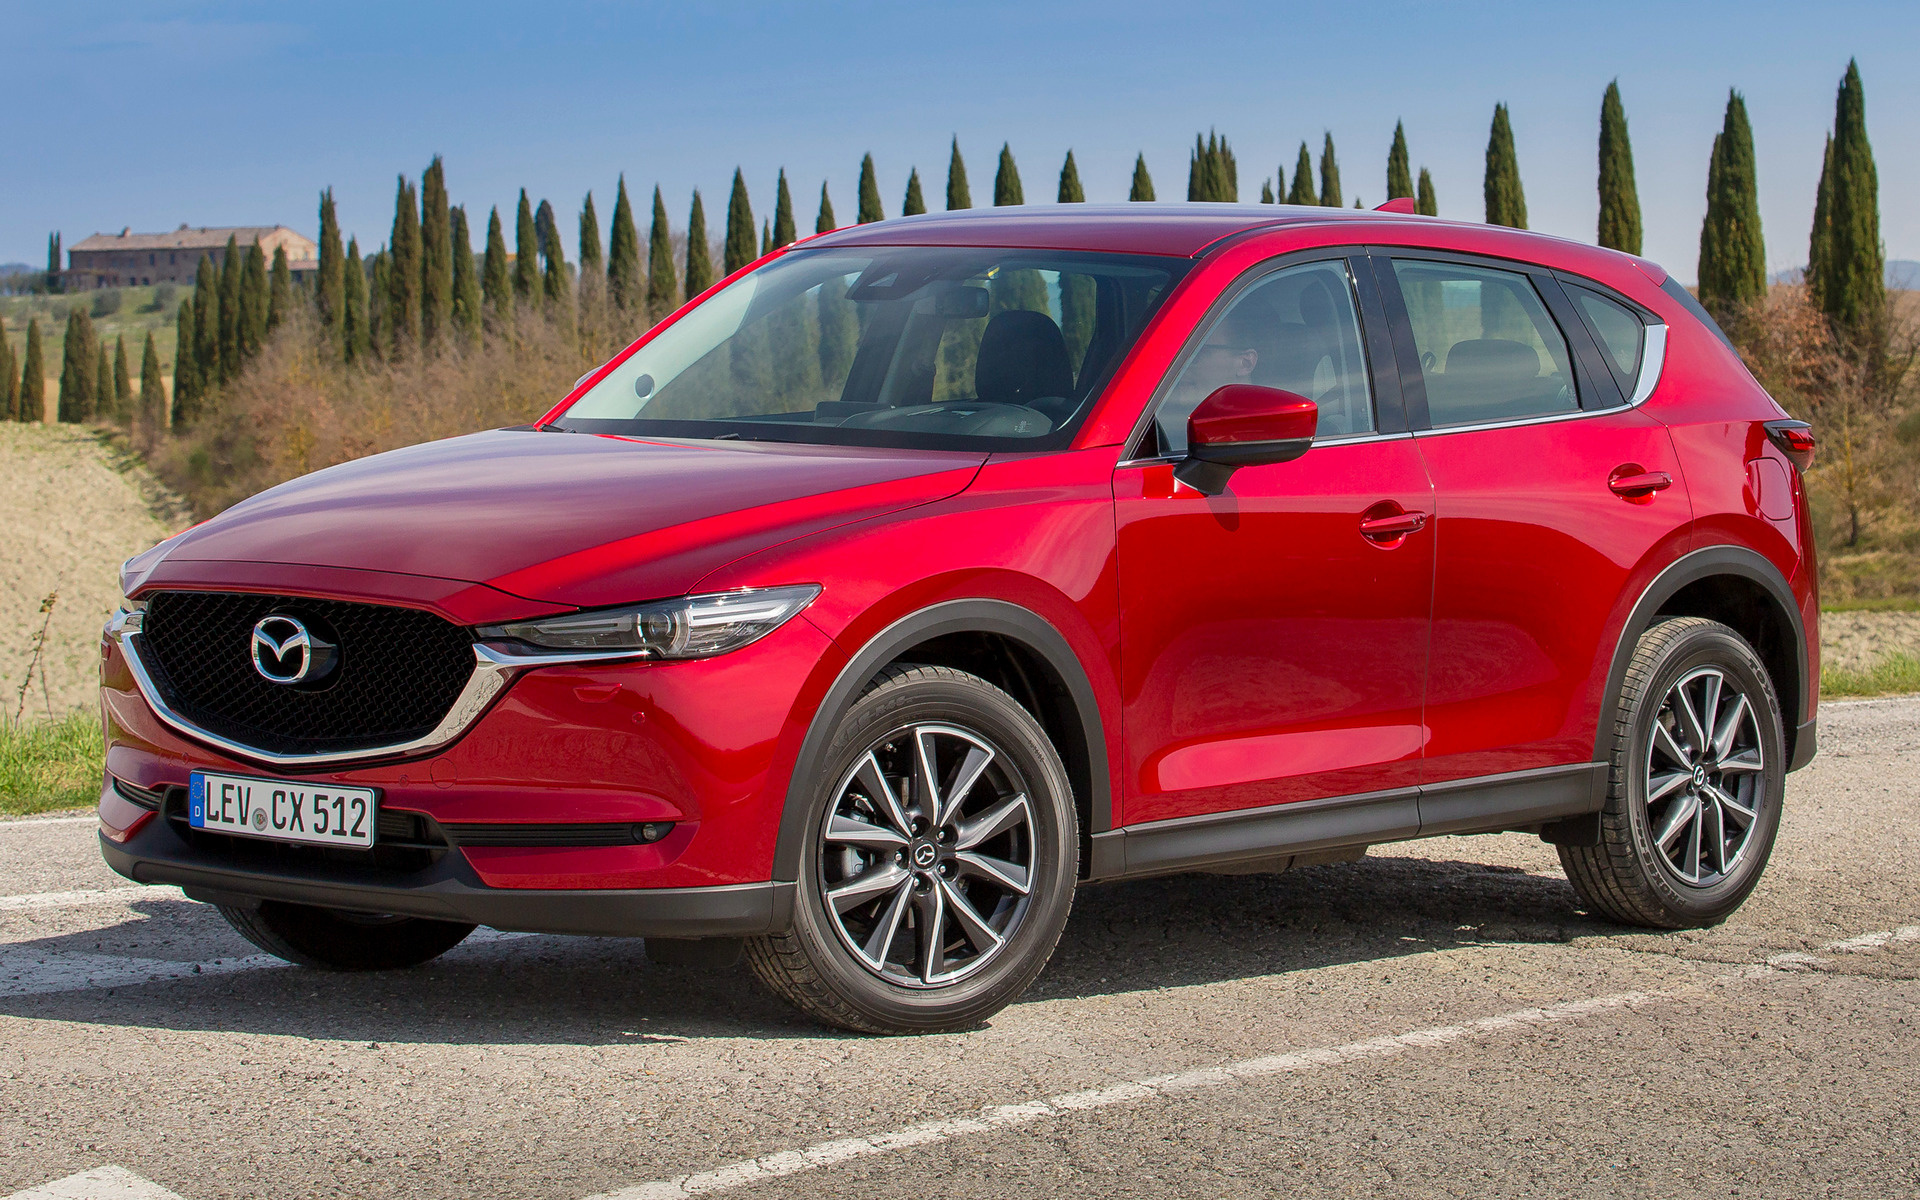 2017 Mazda CX-5 - Wallpapers and HD Images | Car Pixel